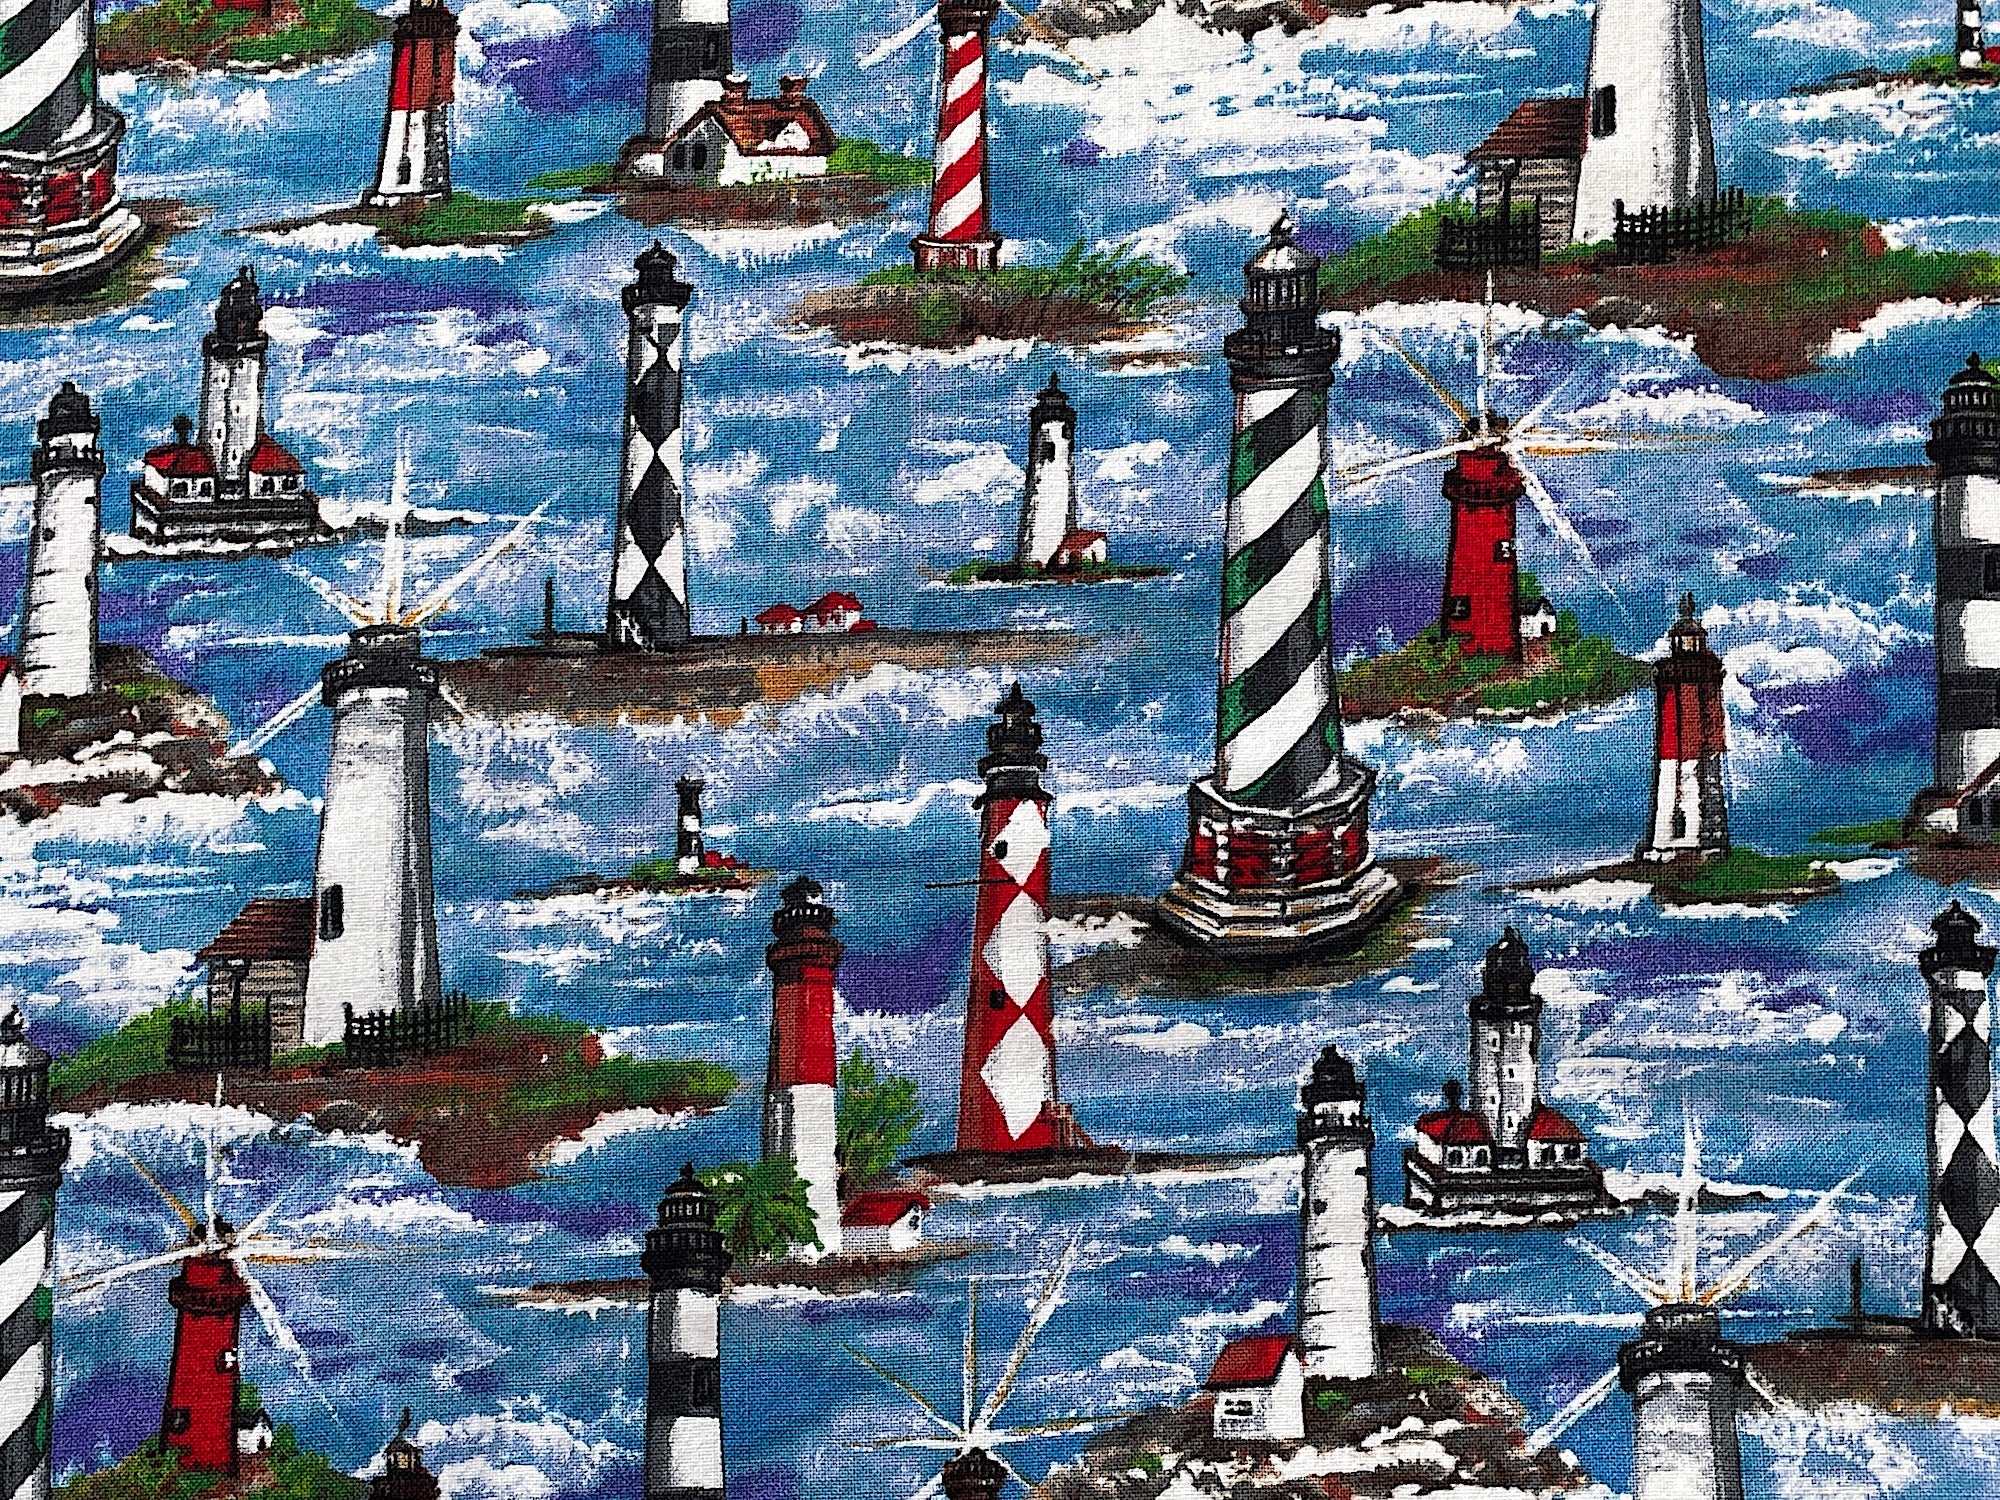 Coast waters with lighthouses of different colors, sizes and shapes.